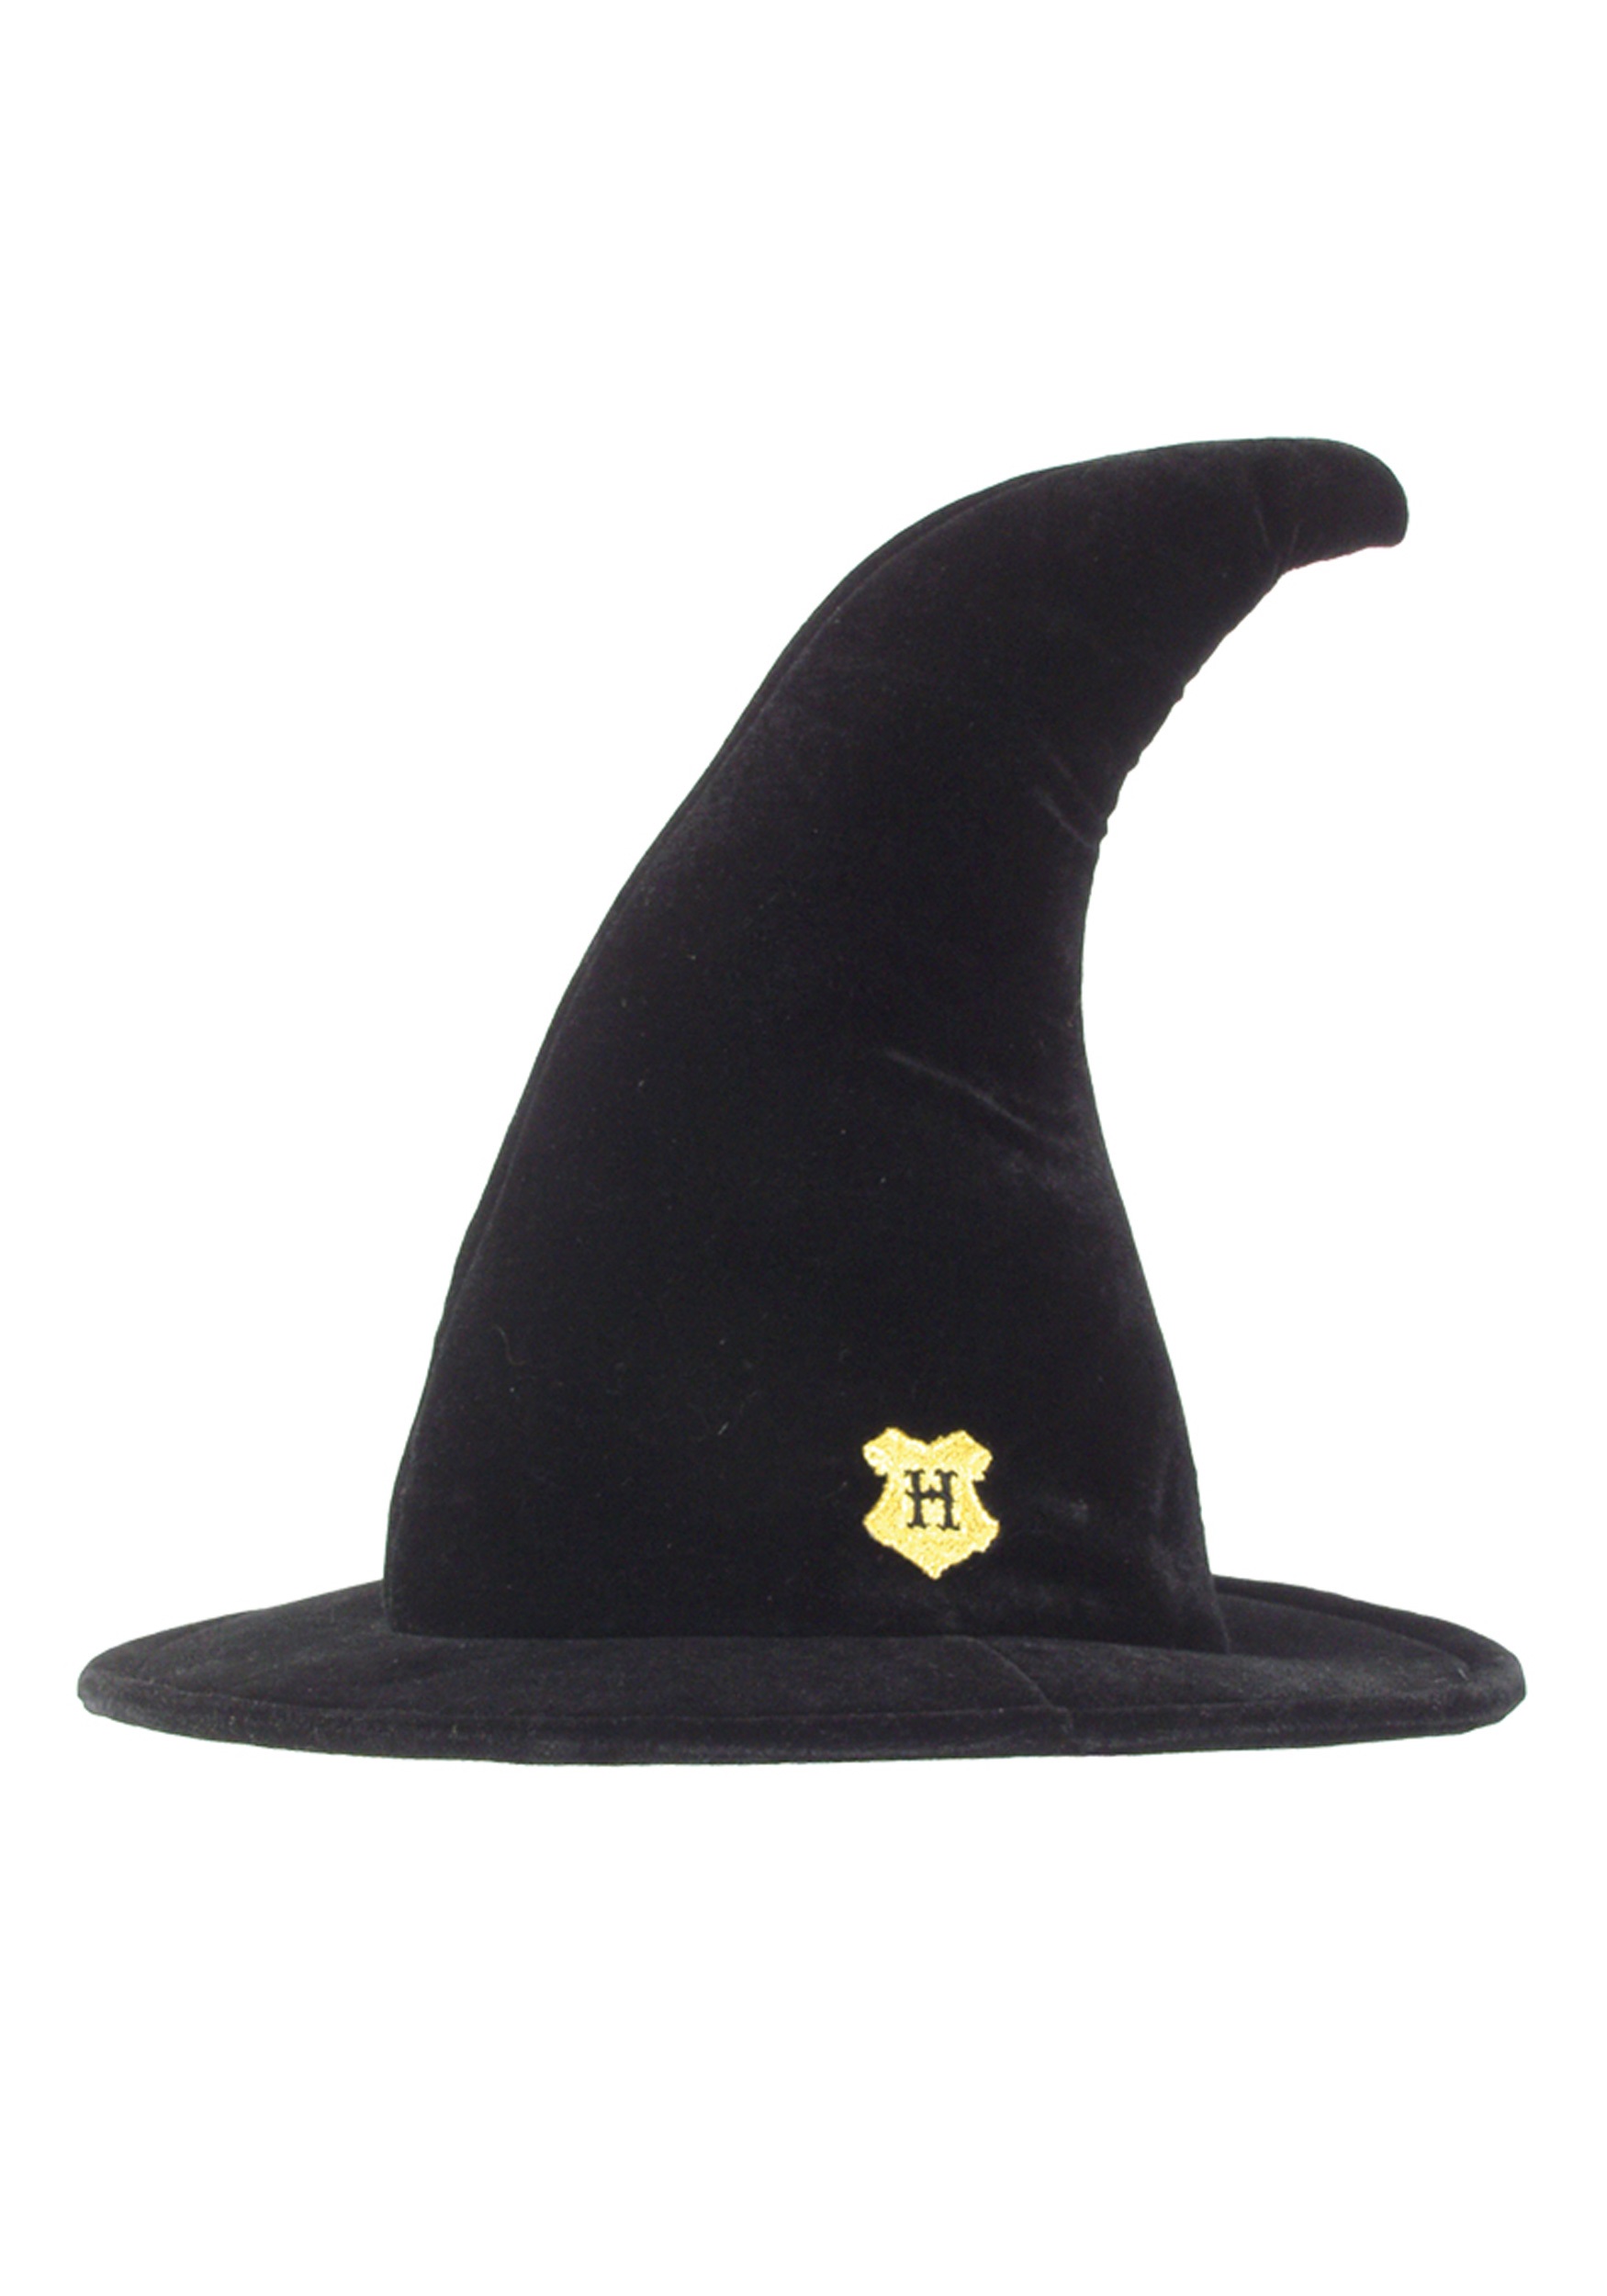 Deluxe Hogwarts Student Witch Hat - Harry Potter Hat Accessory